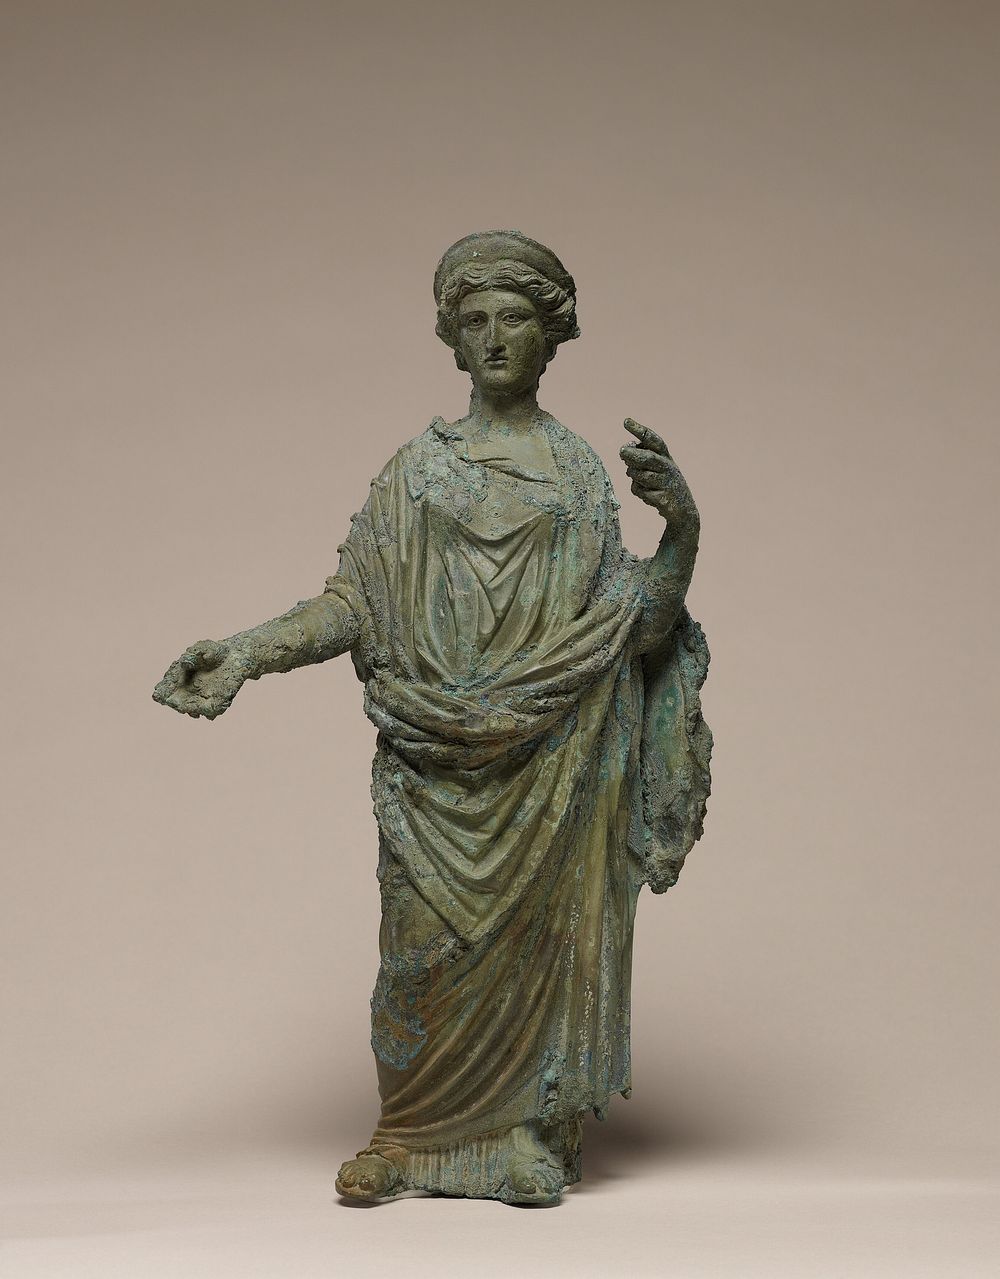 Statuette of a Goddess, probably Ceres or Juno